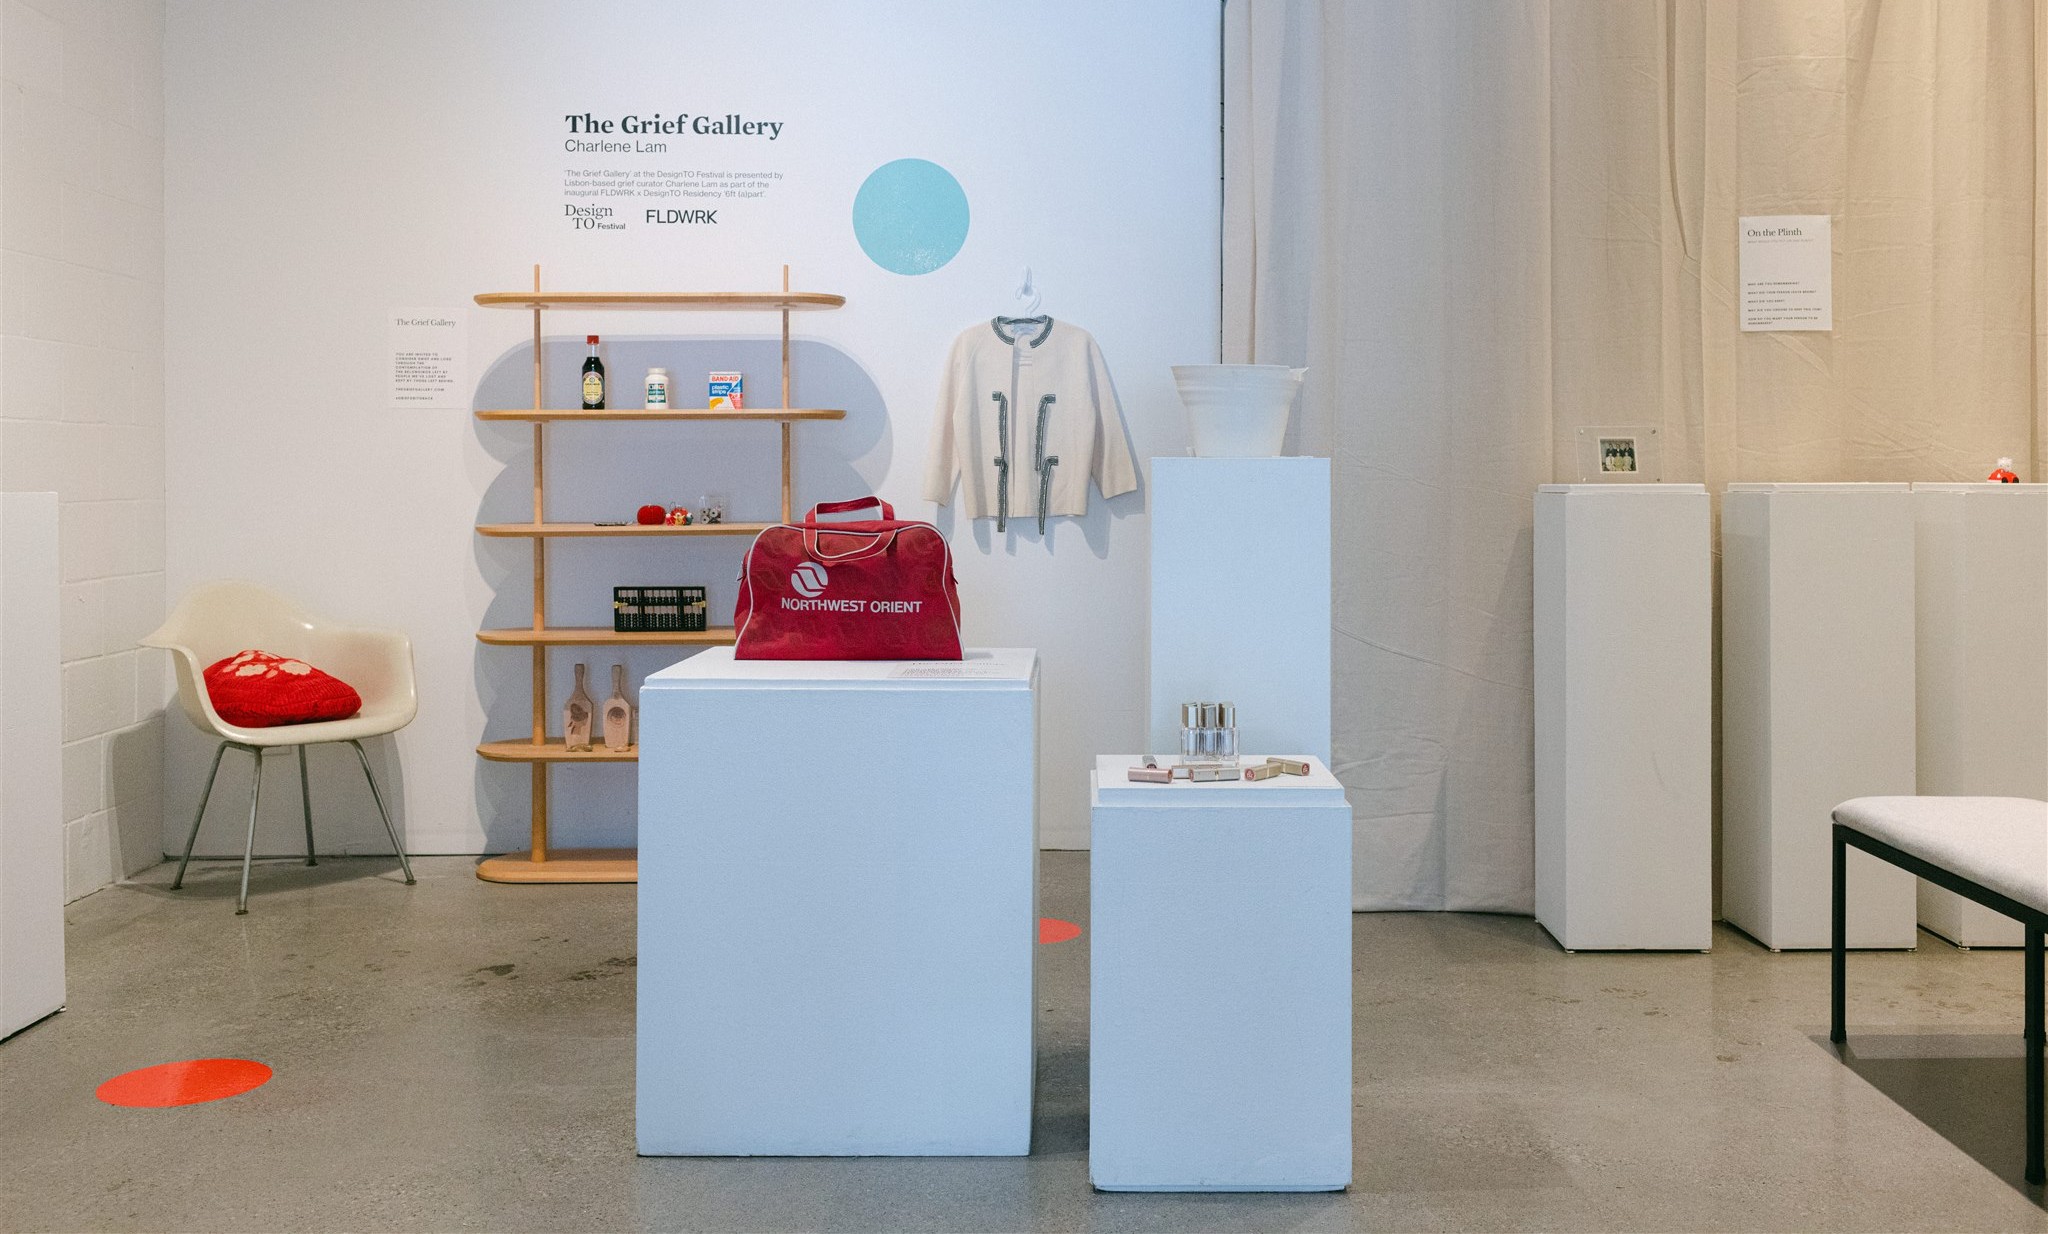 Gallery with white plinths and assortment of objects on them